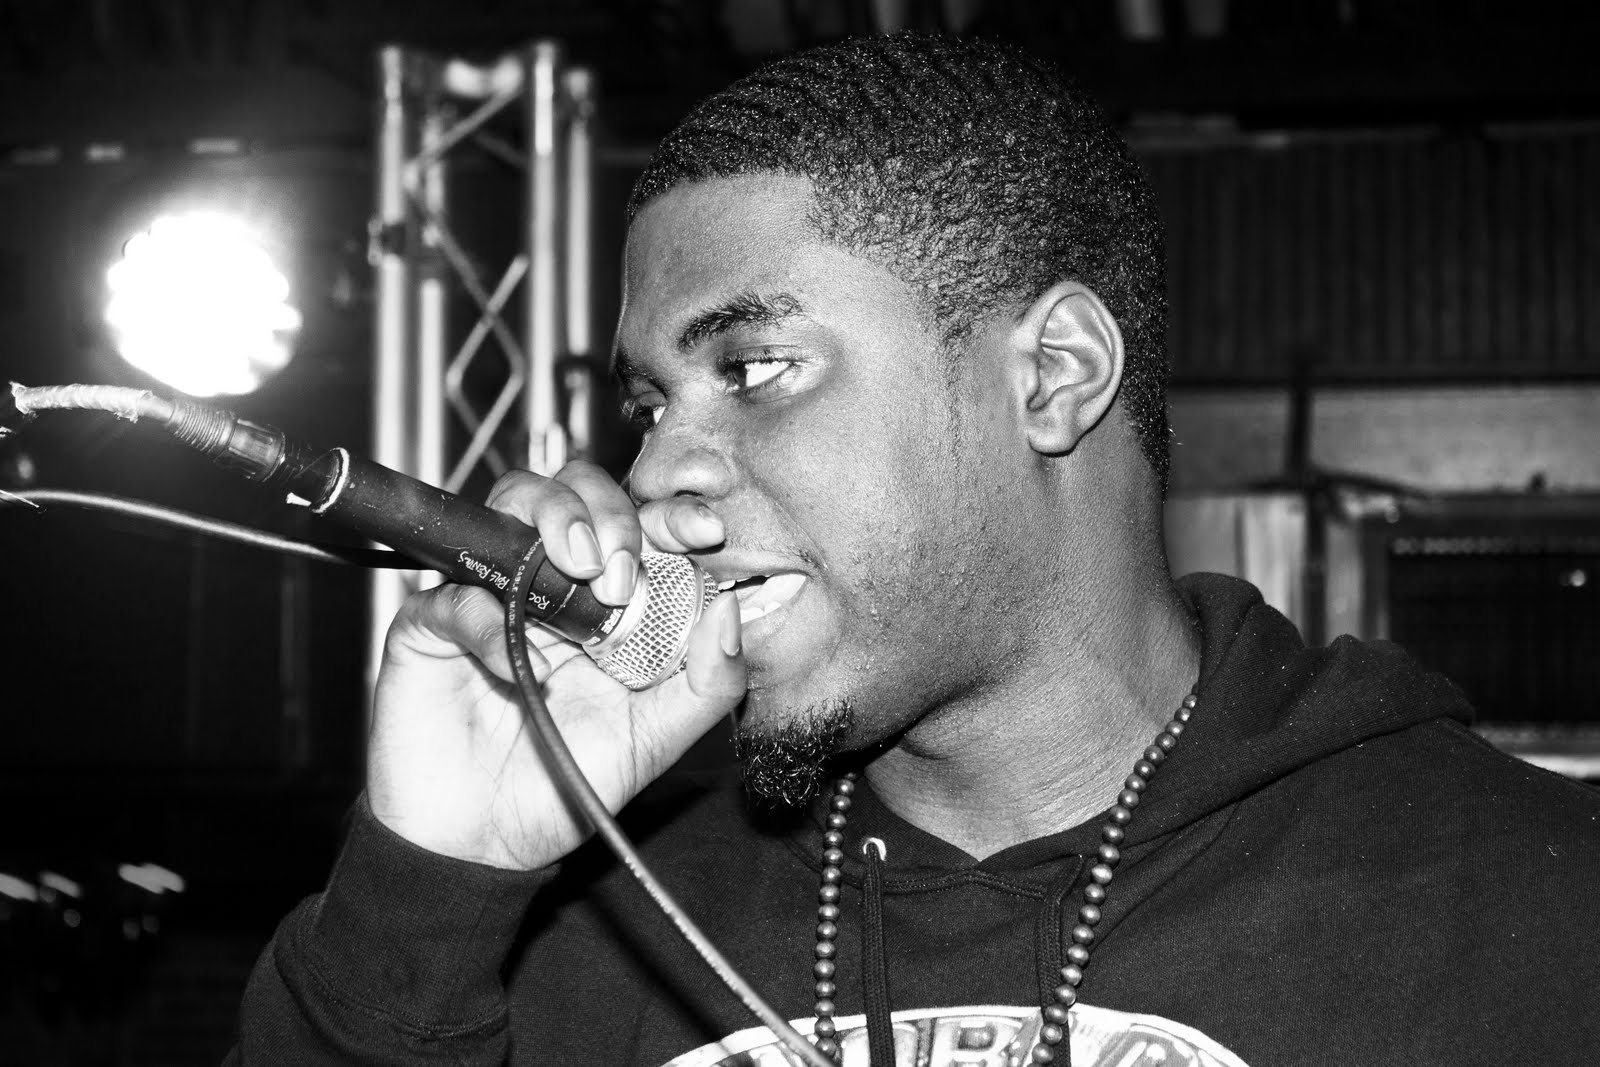 Big K.R.I.T. - "Reign On" (Produced by 9th Wonder)